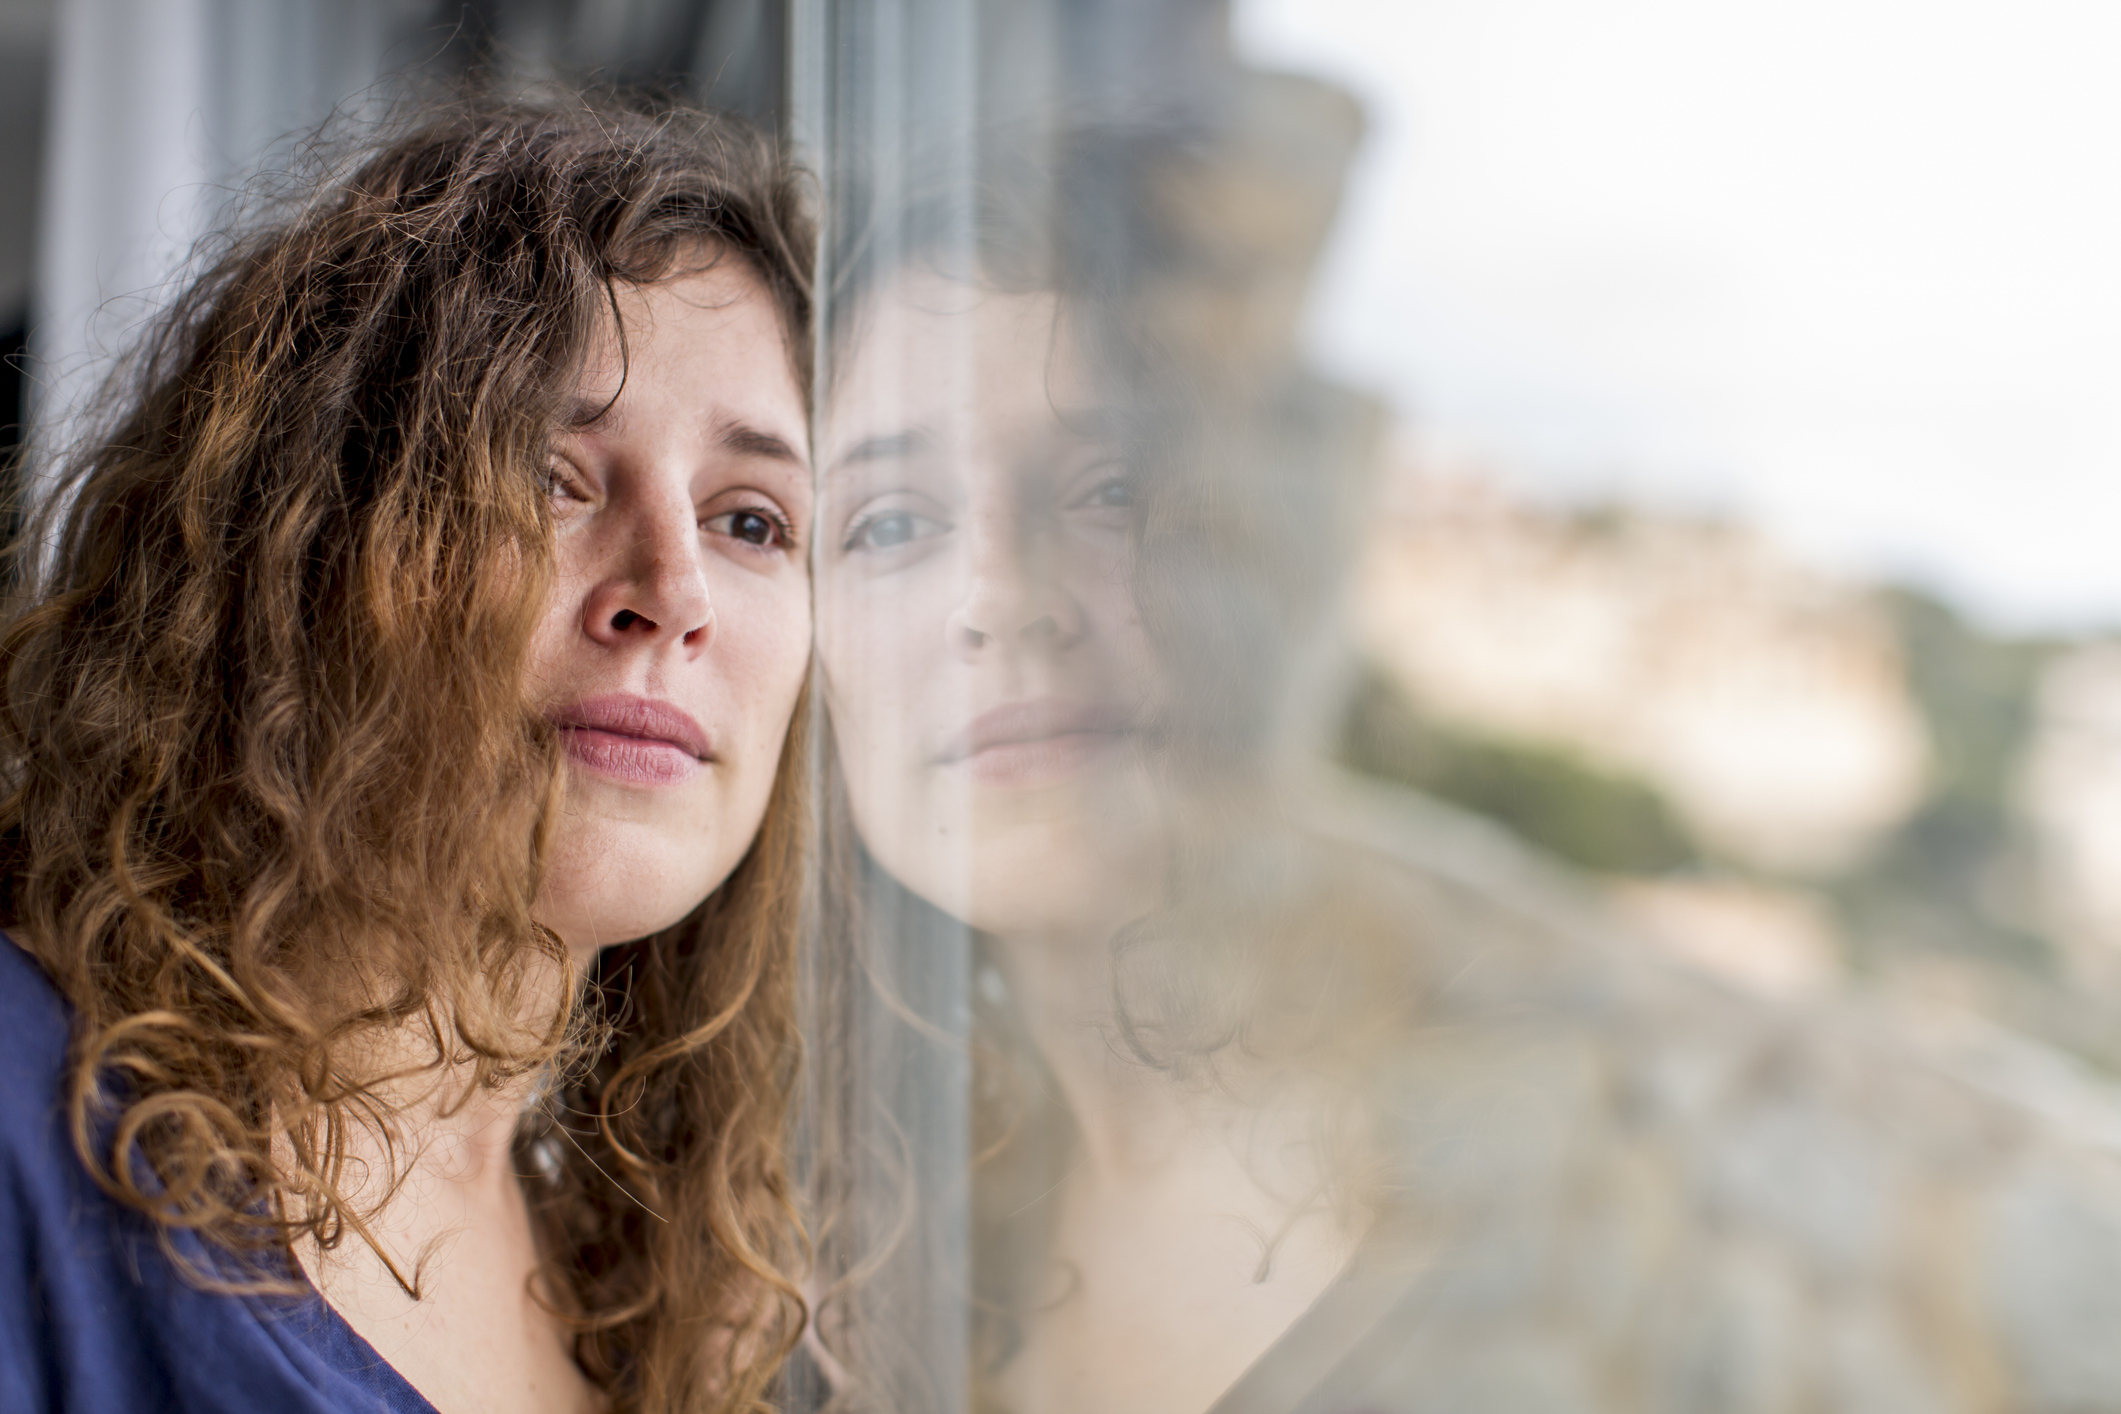 Woman with wavy hair resting her head against a window, reflected on the glass, looking thoughtful